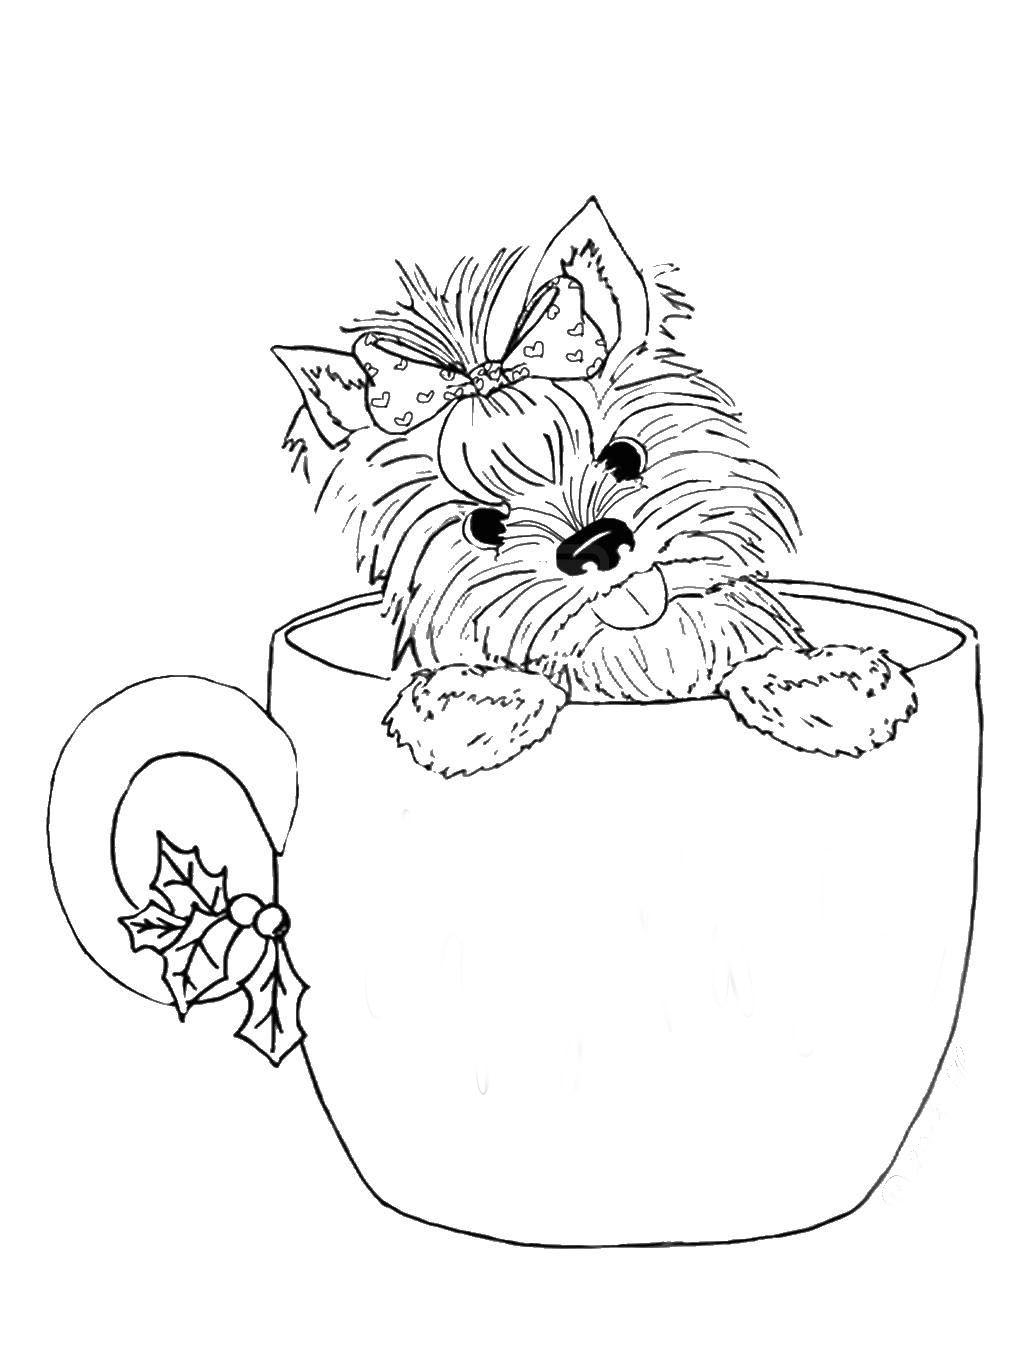 Yorkshire terrier Coloring Pages to download and print for free